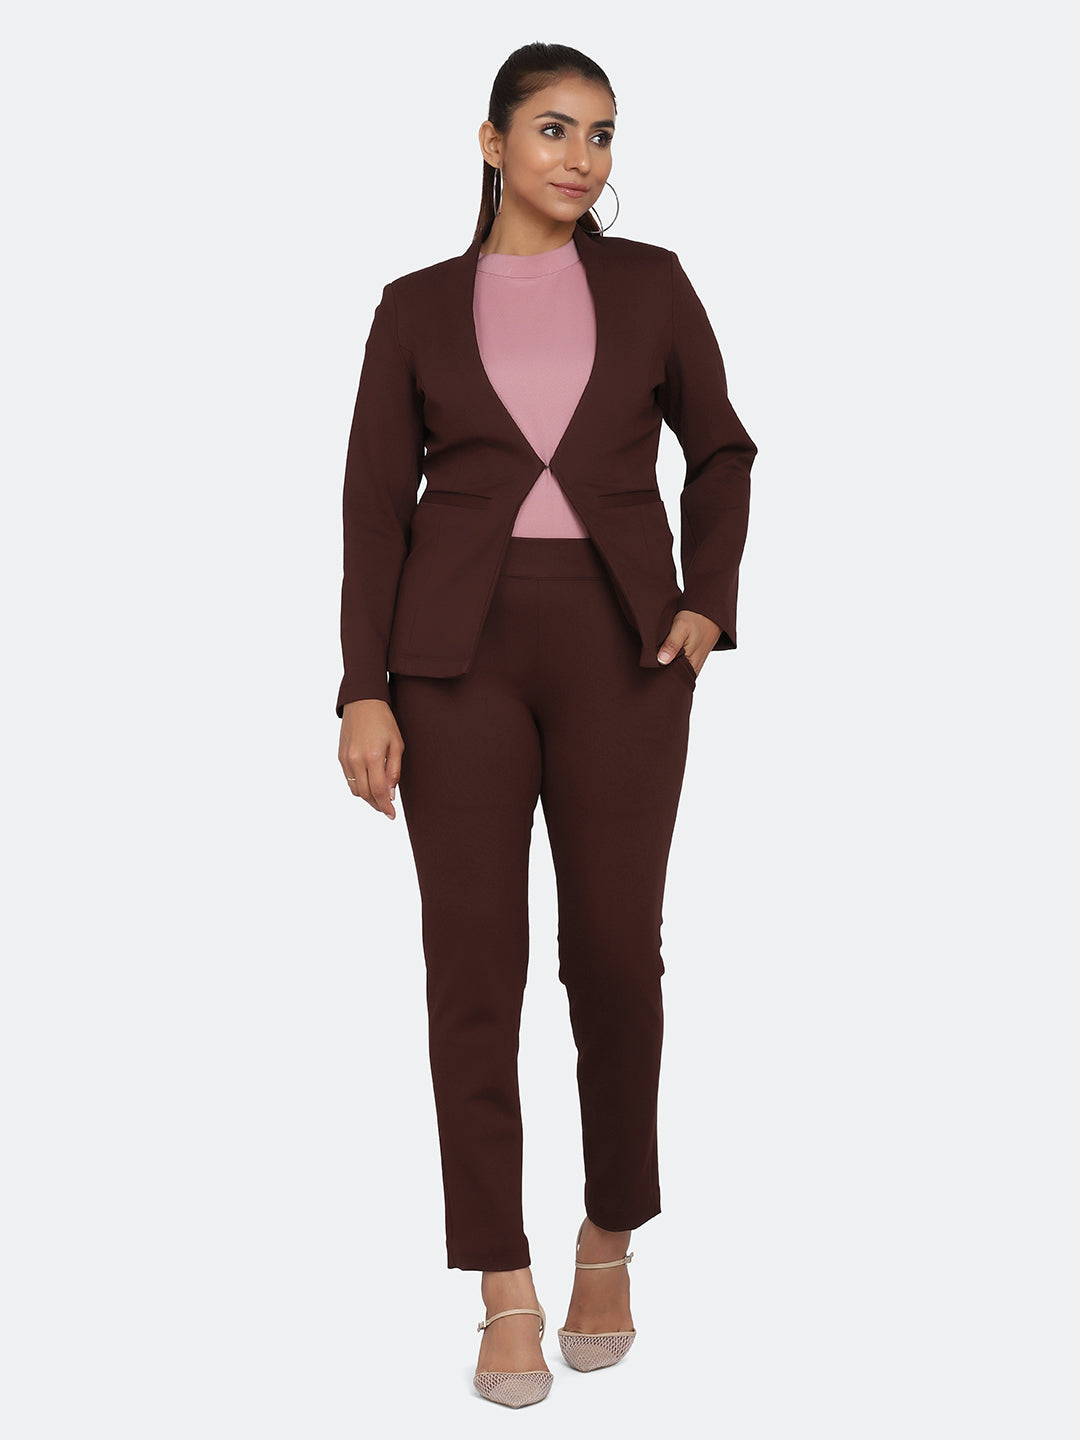 Women's Formal Pant Suits for Women Office Work Wear 2 Two Piece Set Female  Outfits Solid Black White Red Pants Suit with Blazer - AliExpress